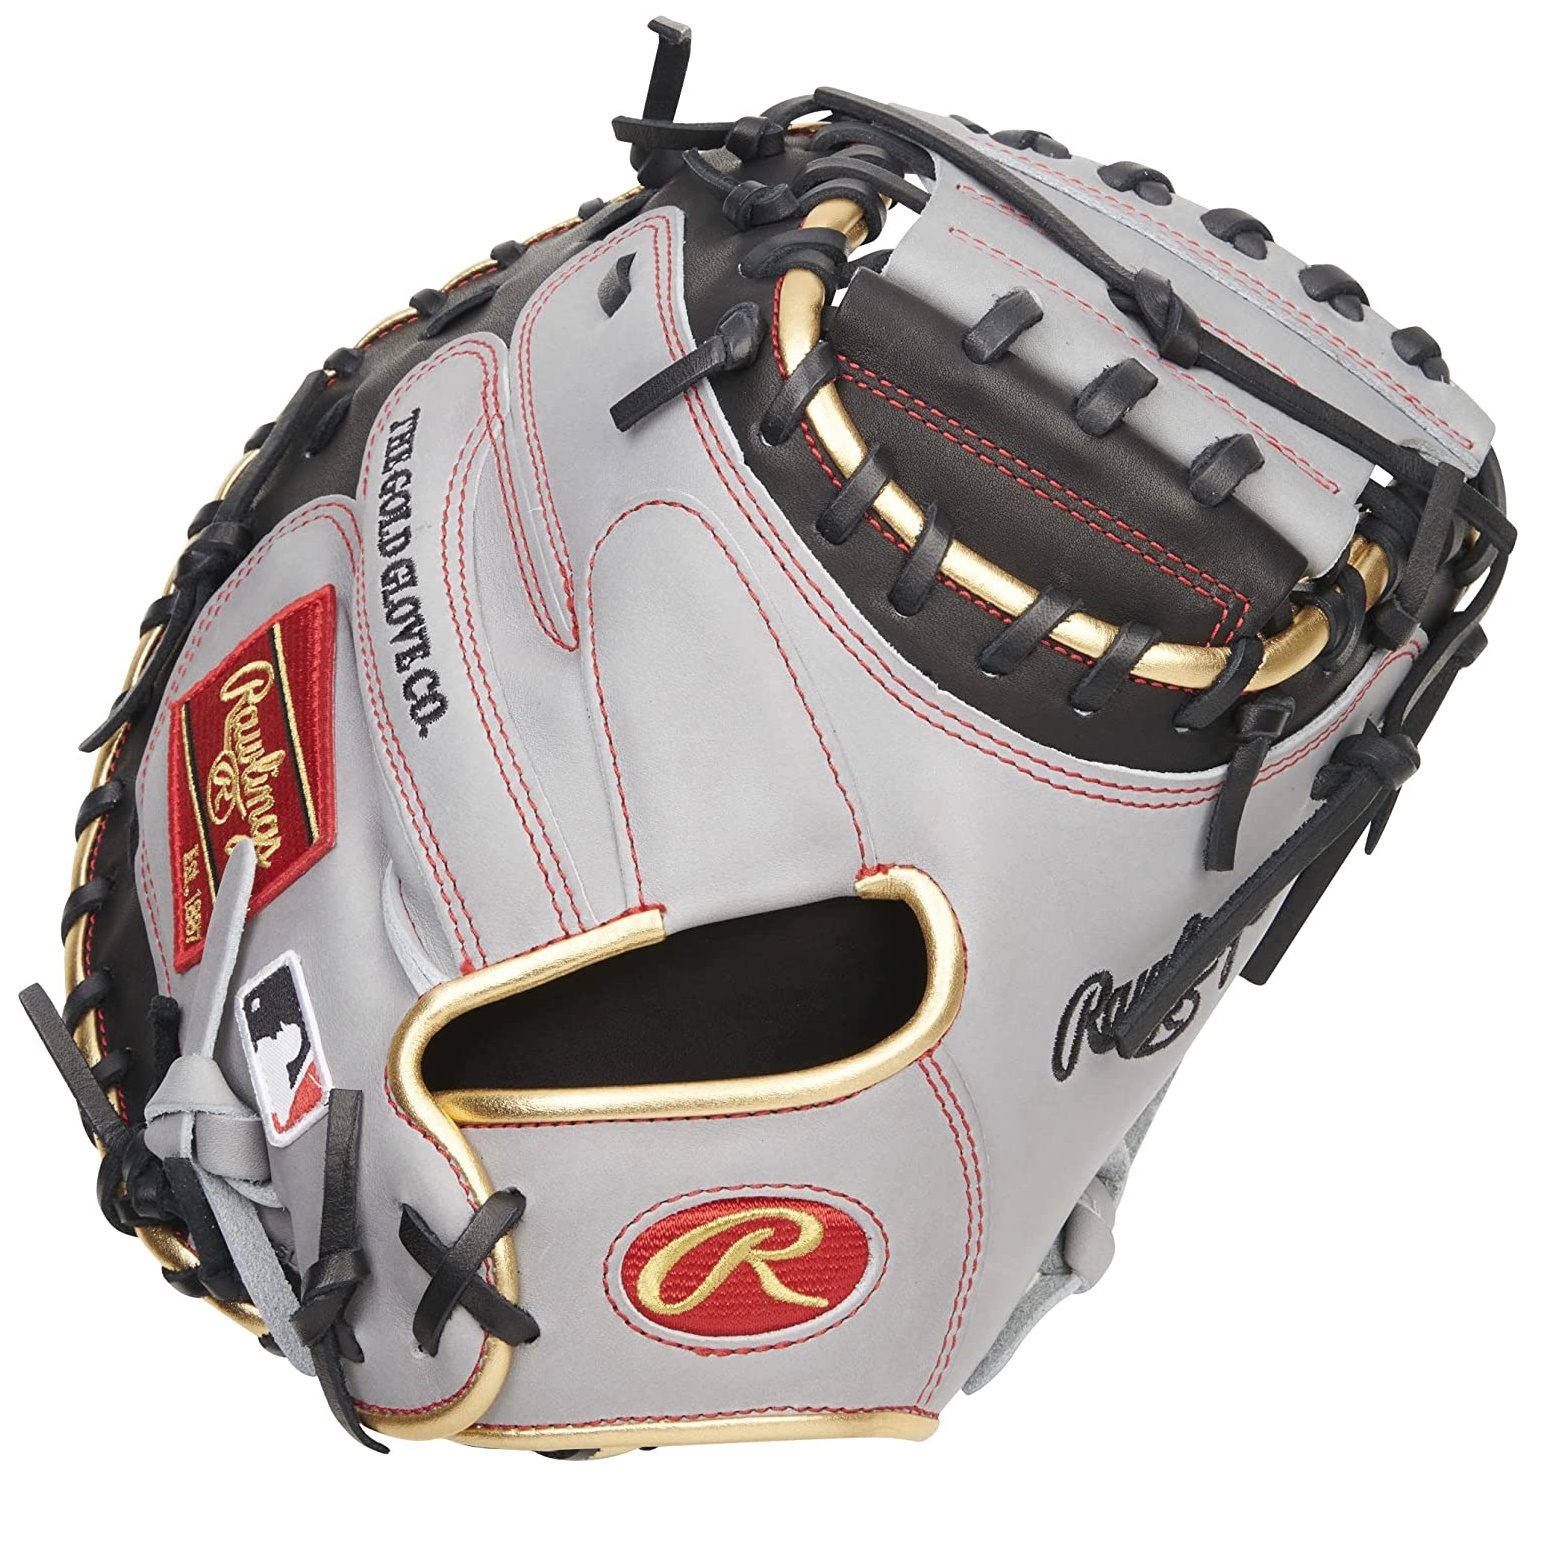 rawlings-heart-of-the-hide-baseball-catchers-mitt-r2g-narrow-fit-gary-sanchez-33-inch-one-piece-closed-web-right-hand-throw PRORCM33-23BGS-RightHandThrow Rawlings  The Rawlings PRORCM33-23BGS Catchers Mitt is designed to get your game-ready